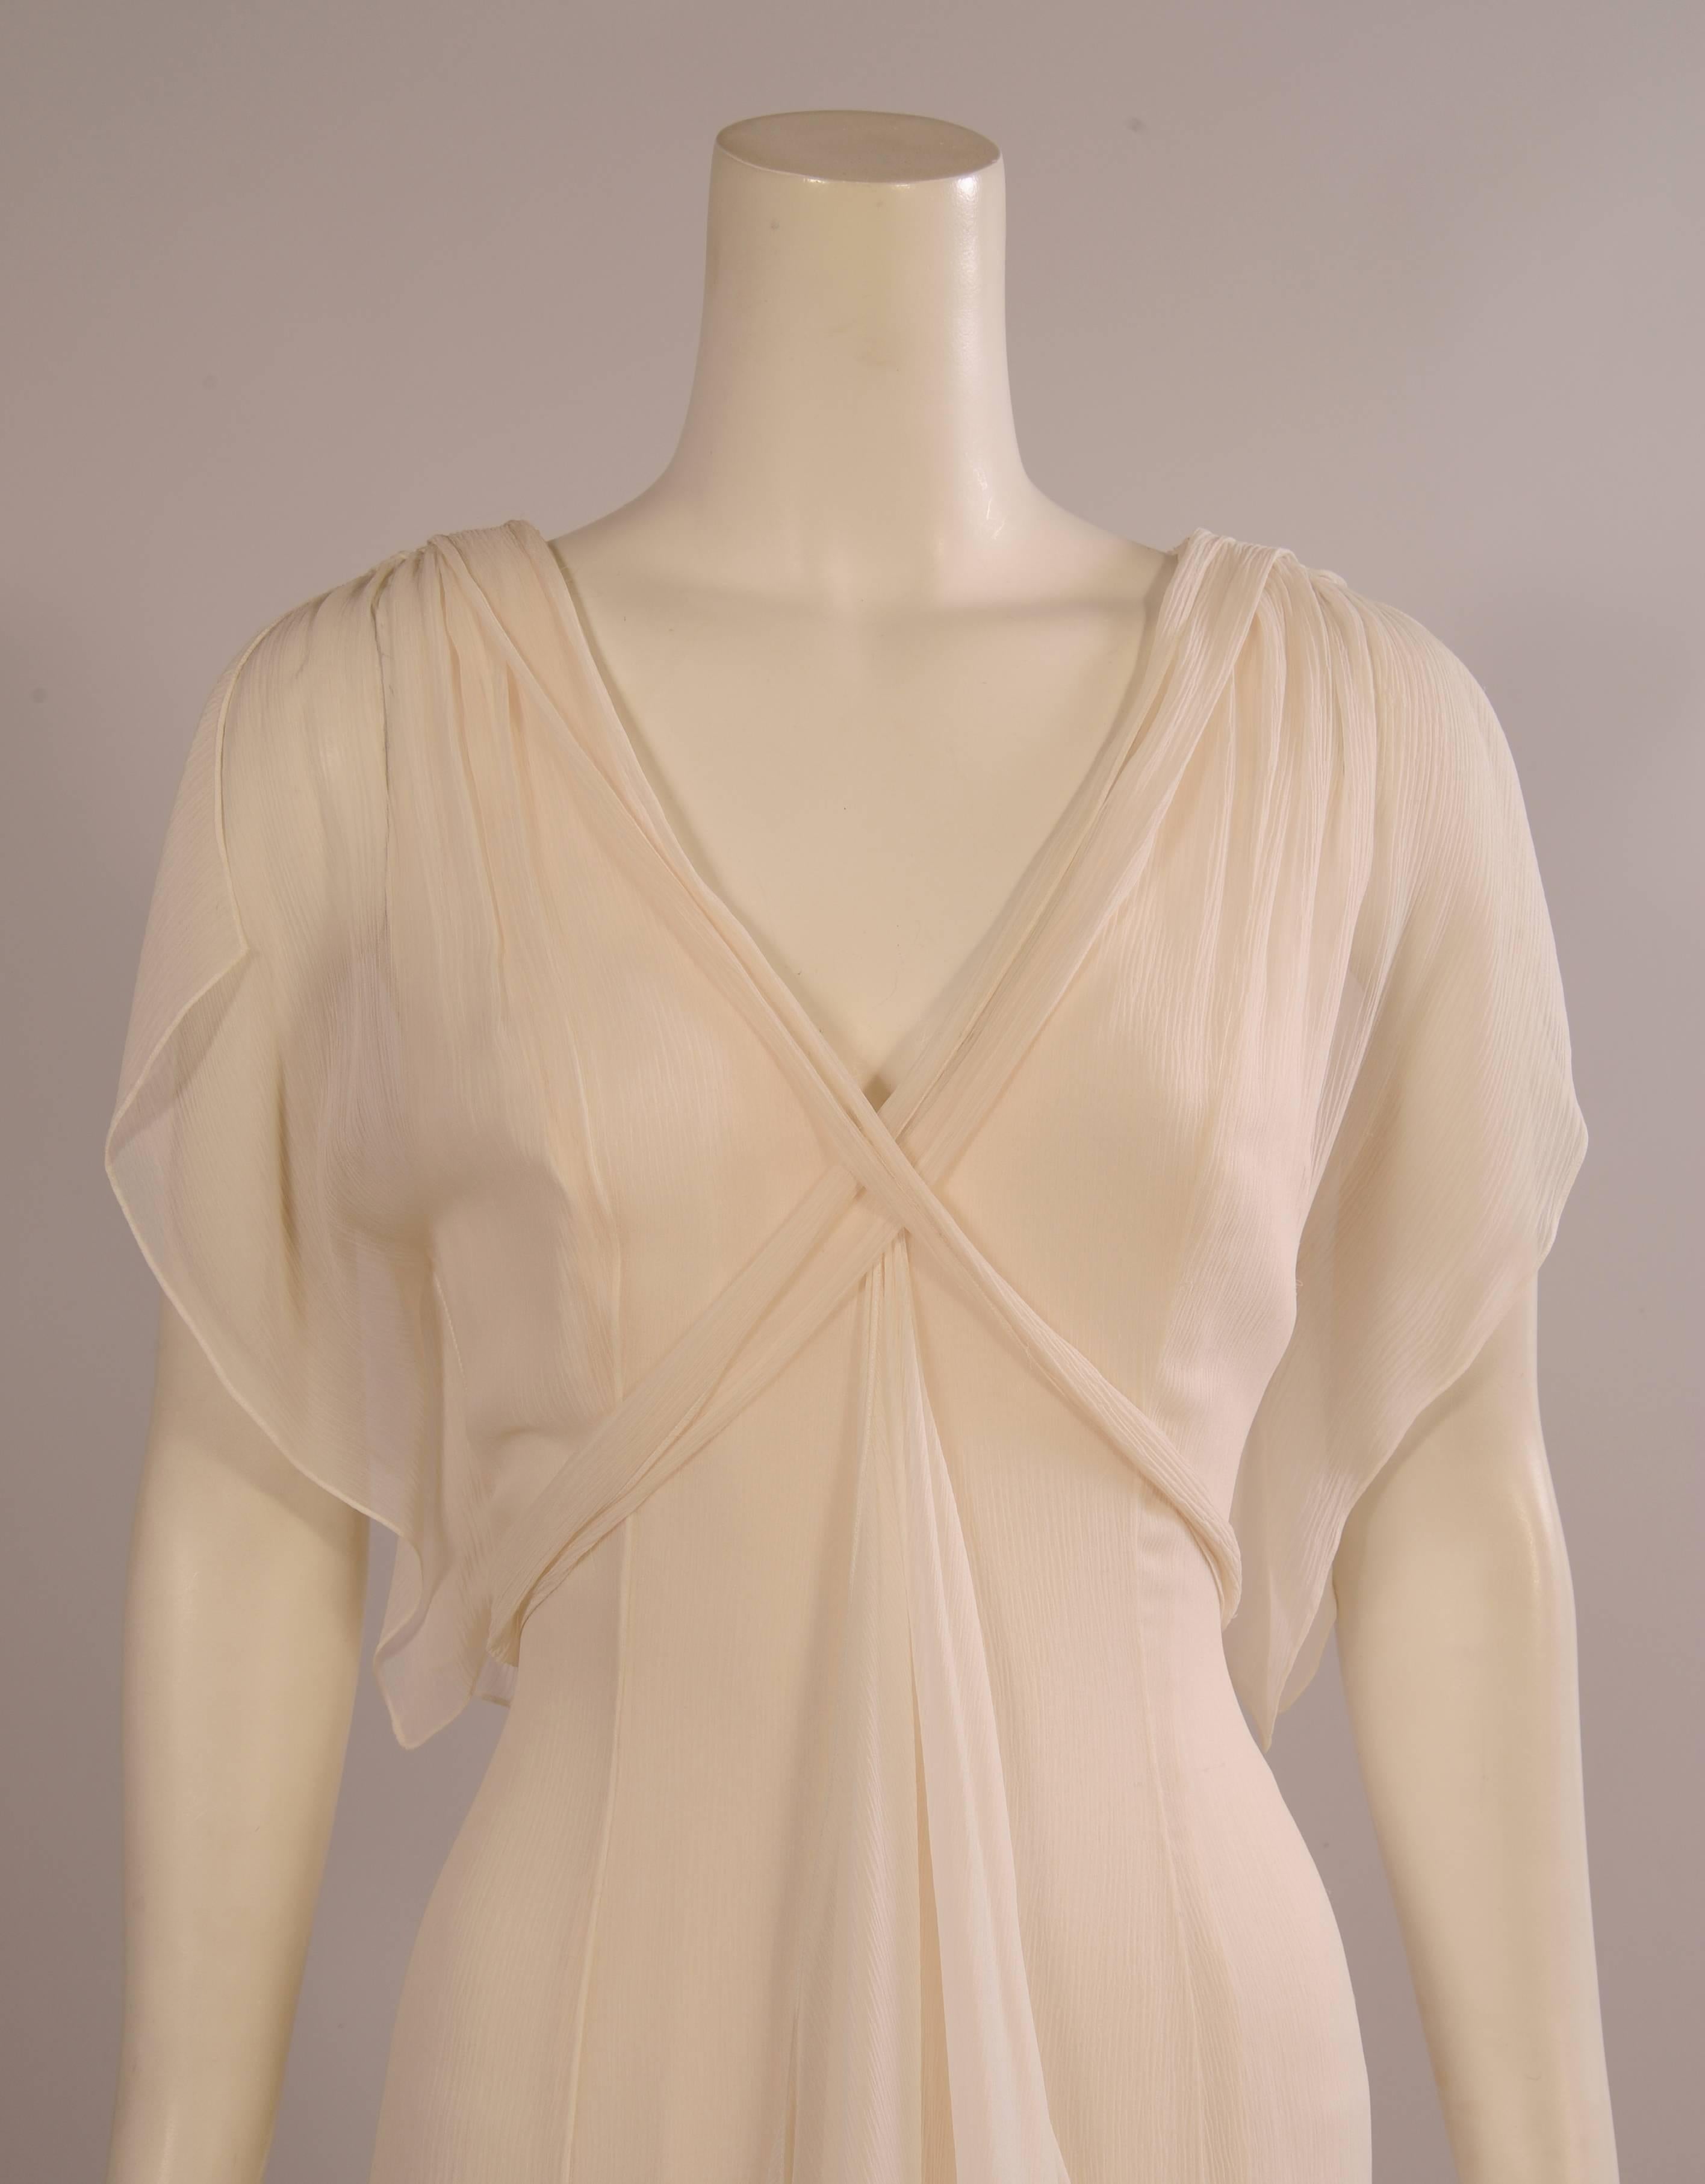 An absolutely gorgeous gown for a big party or wedding, it would look fabulous on a bride too! The silk georgette drapes beautifully from the V shaped neckline in a long floating panel.  Shorter panels begin at the hipline and continue around the